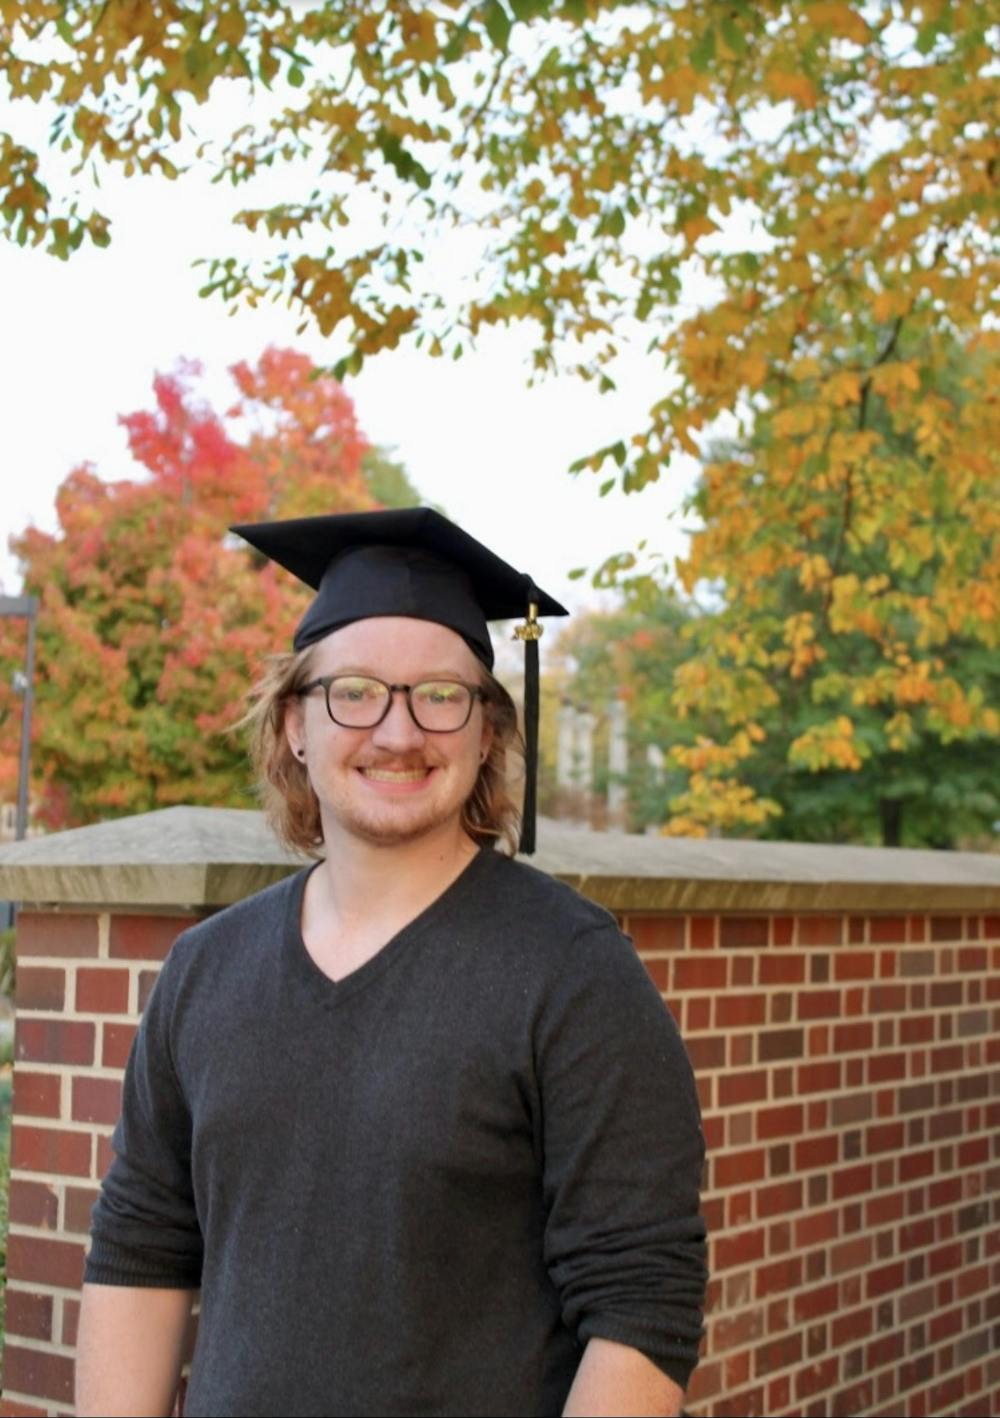 <p>Hunter Wallace poses for a photo in his graduation cap. Wallace took a job at a software company after graduating in spring 2021, where he works from home. <strong>Hunter Wallace, Photo Provided</strong></p><p></p>